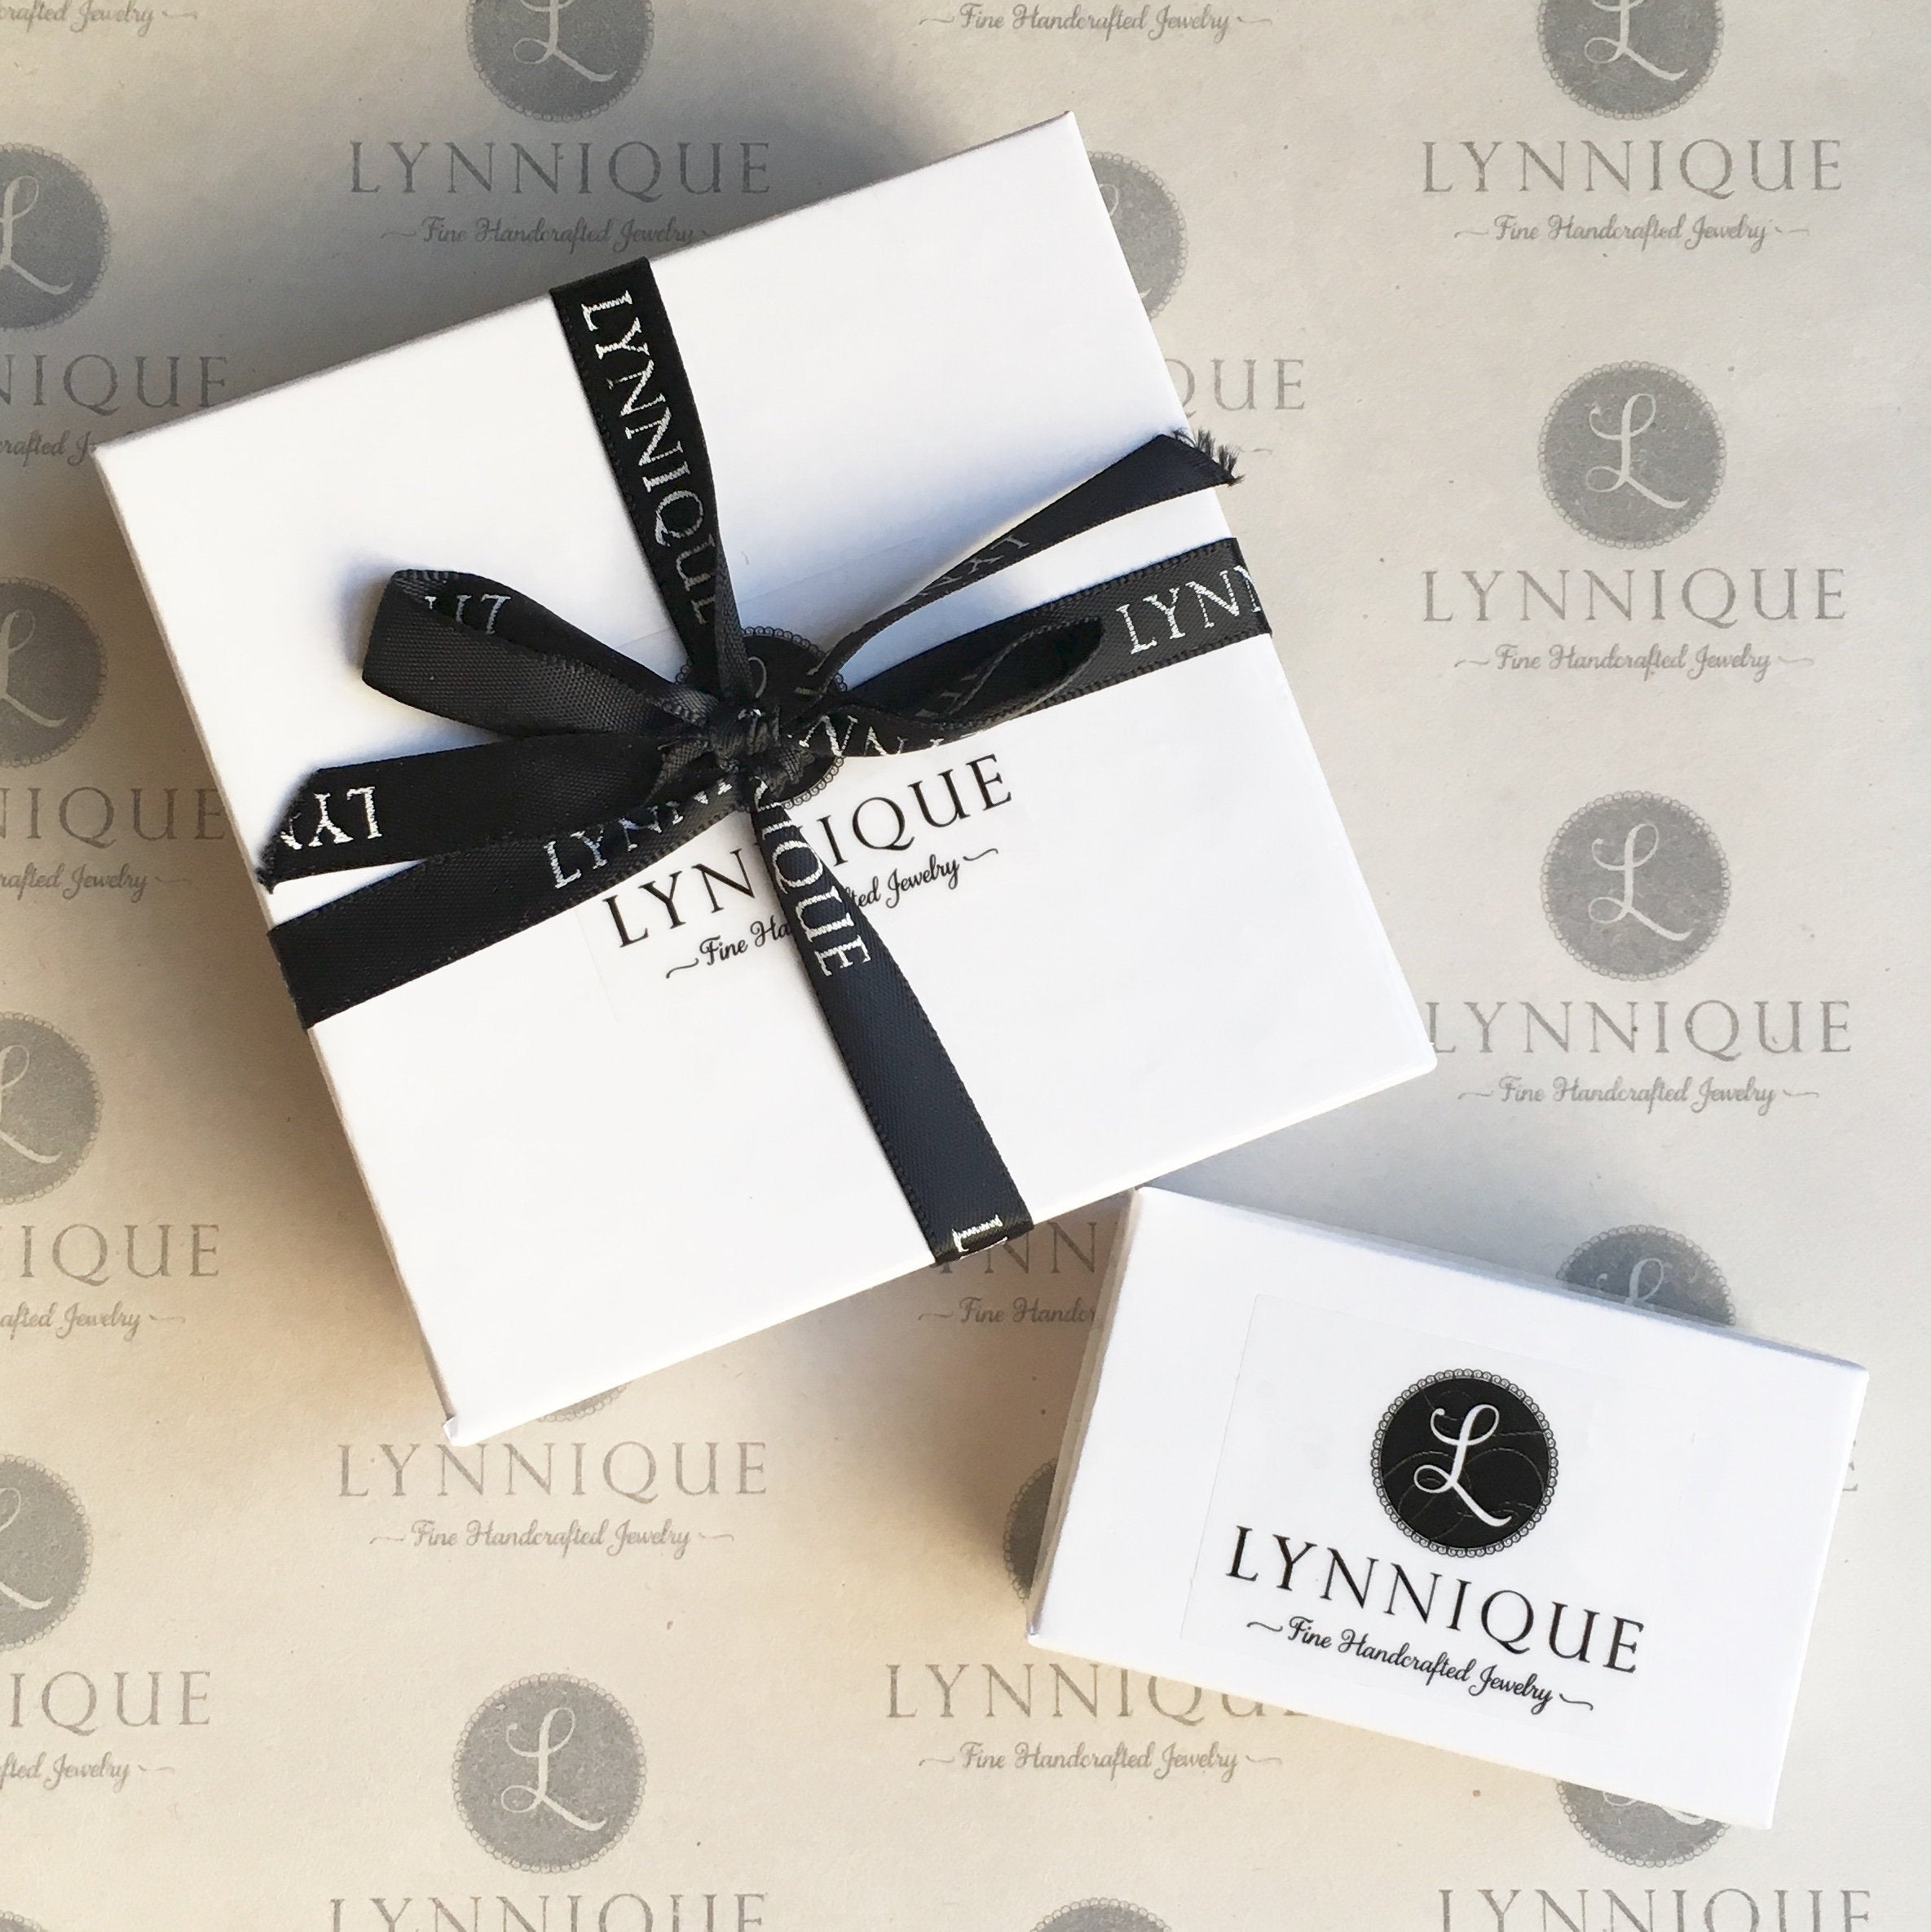 Your beautifully hand-made jewelry will be shipped in a white gift box with black logo and tied with a black ribbon.